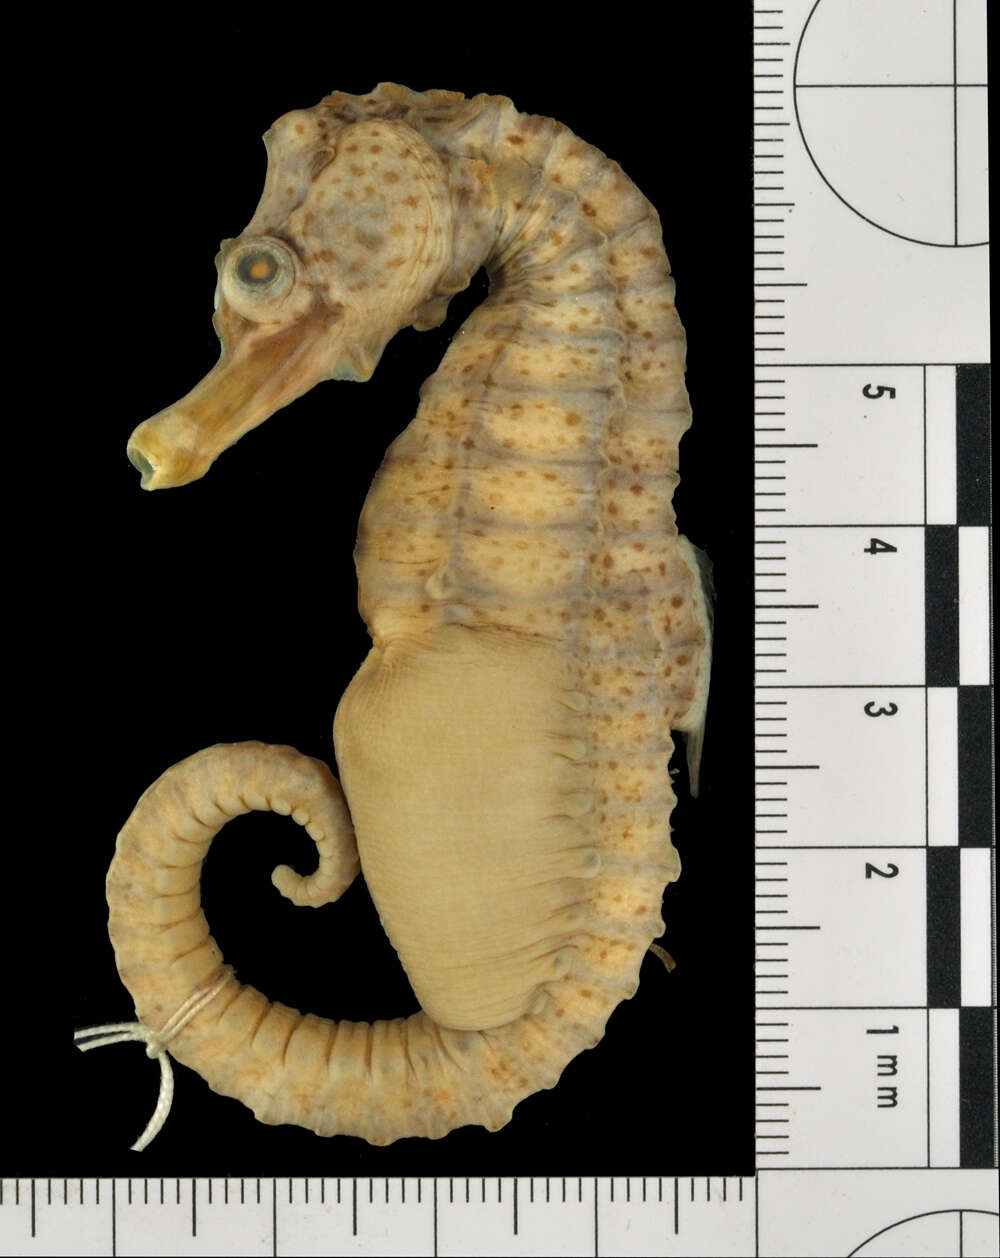 Image of Long-snouted Seahorse